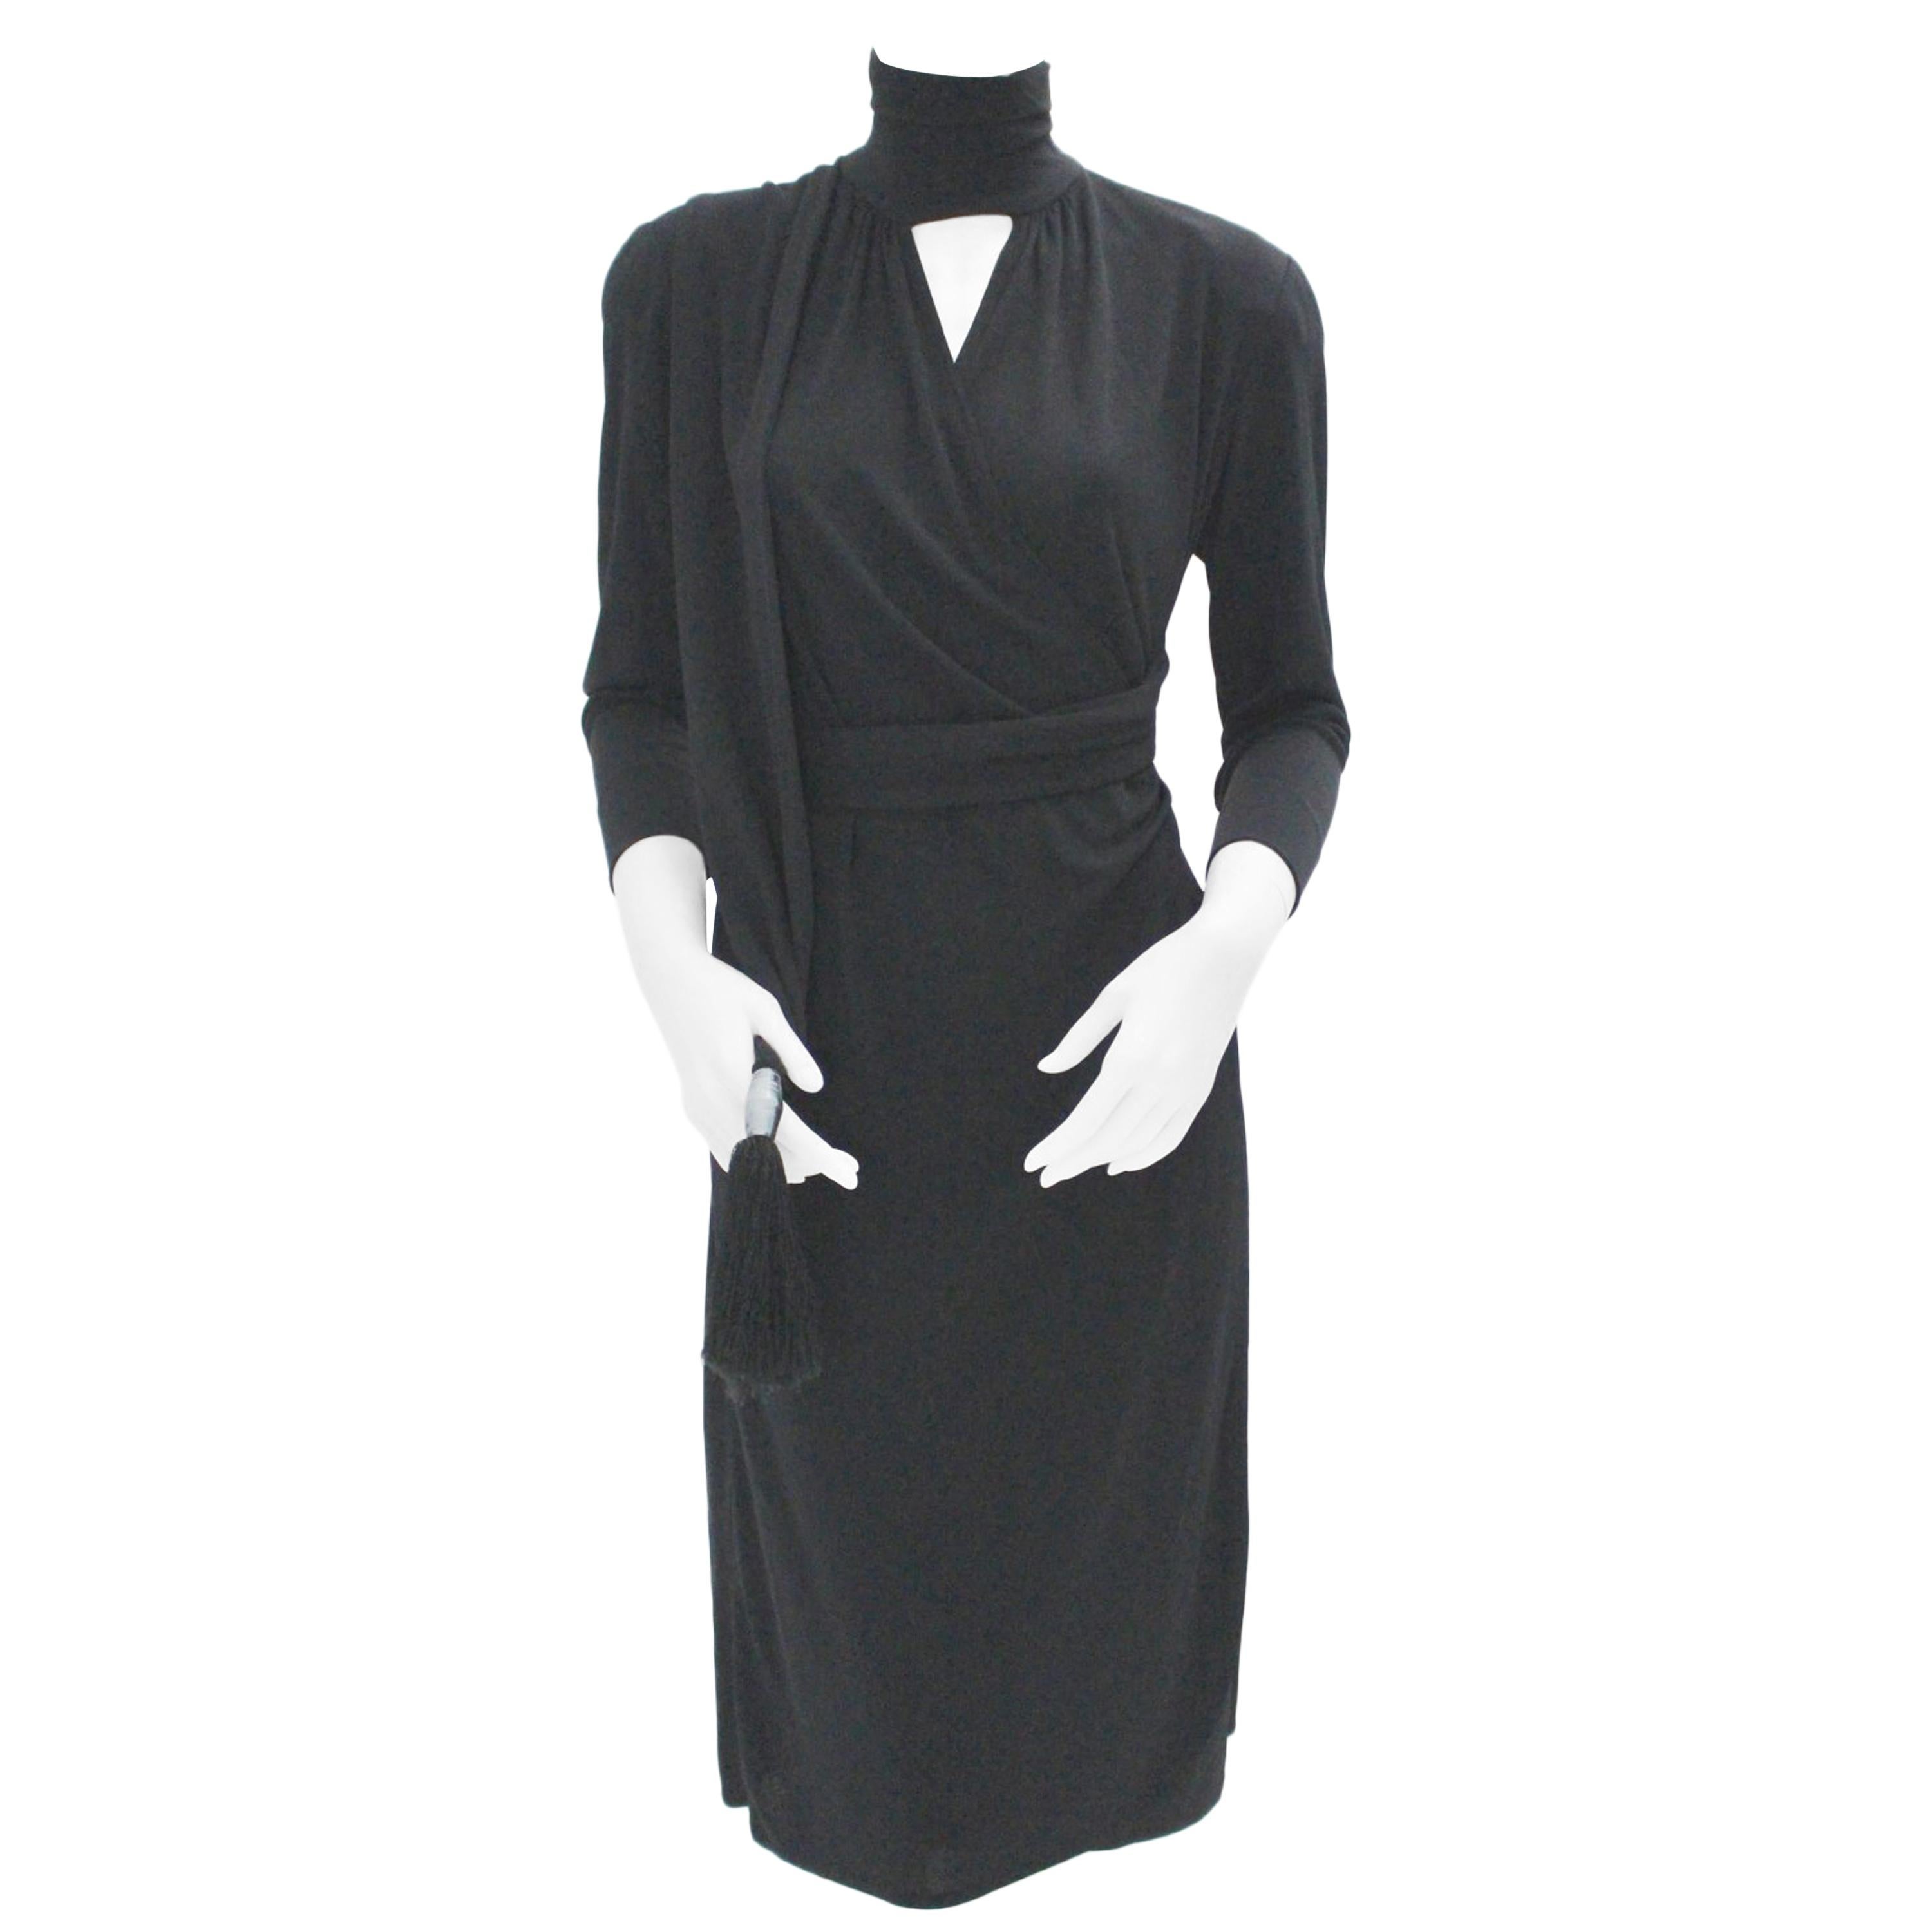 Black Vintage Wrap Evening Dress 1970s Italy For Sale